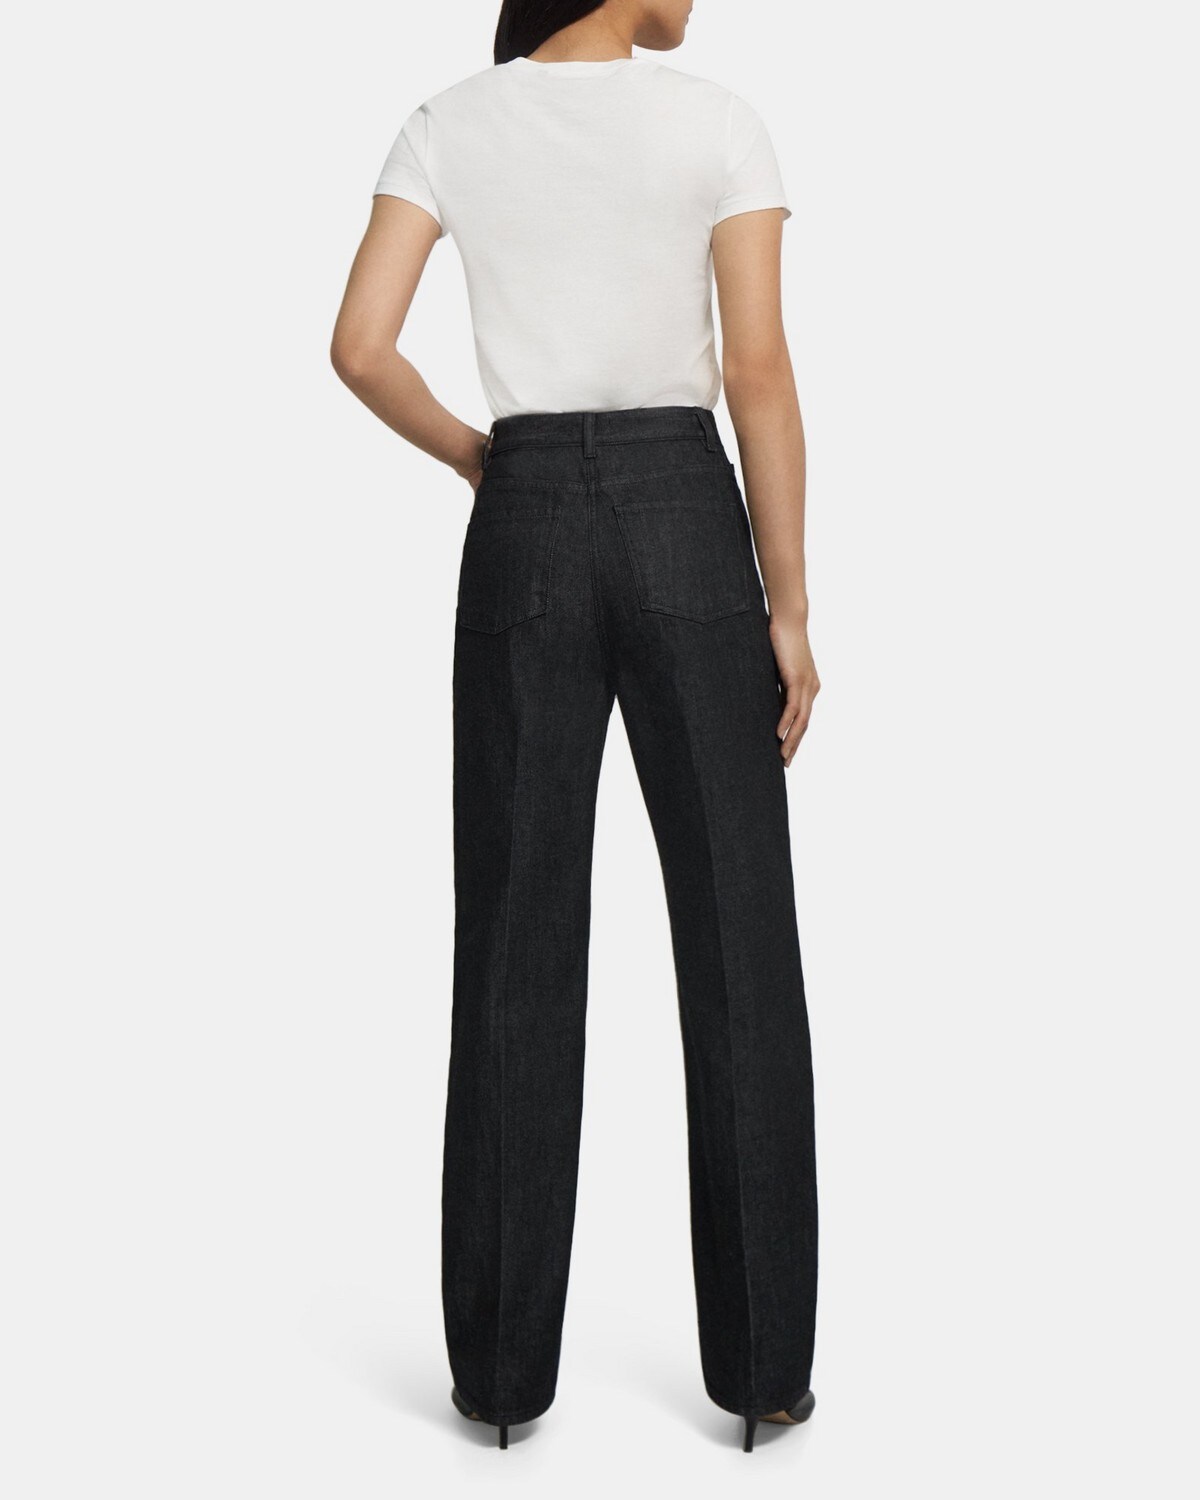 Dyed Denim High-Waisted 5-Pocket Jean | Theory Outlet